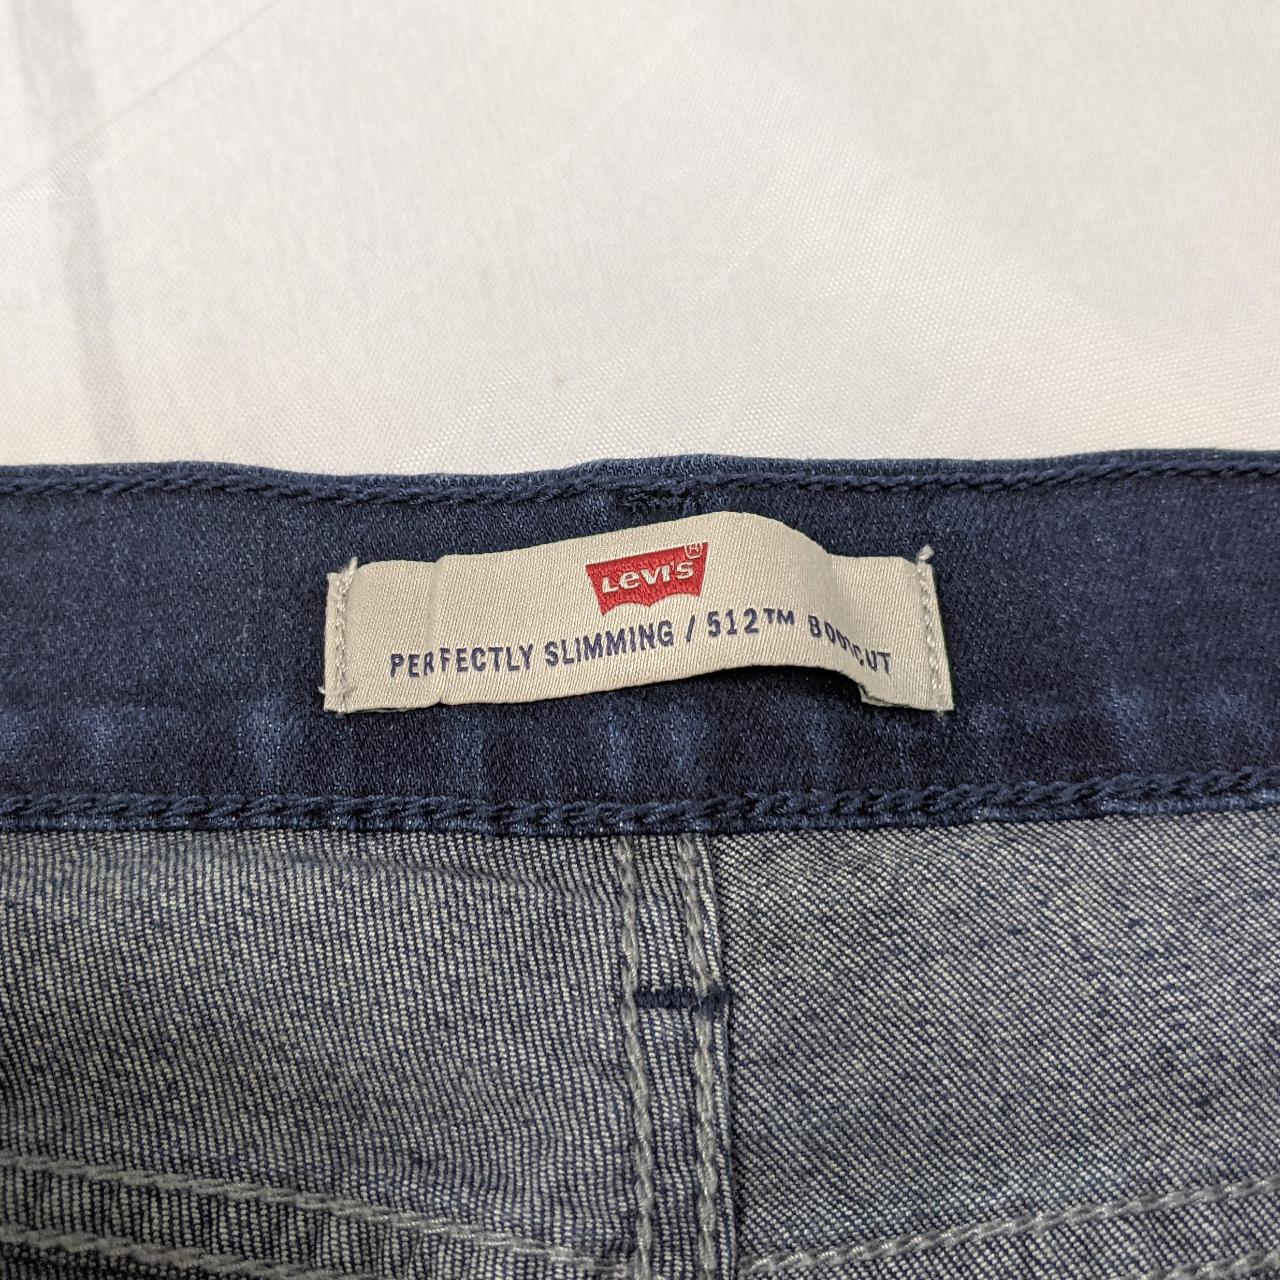 Levi's Perfectly Slim 512 Bootcut Jeans Size 12... - Depop